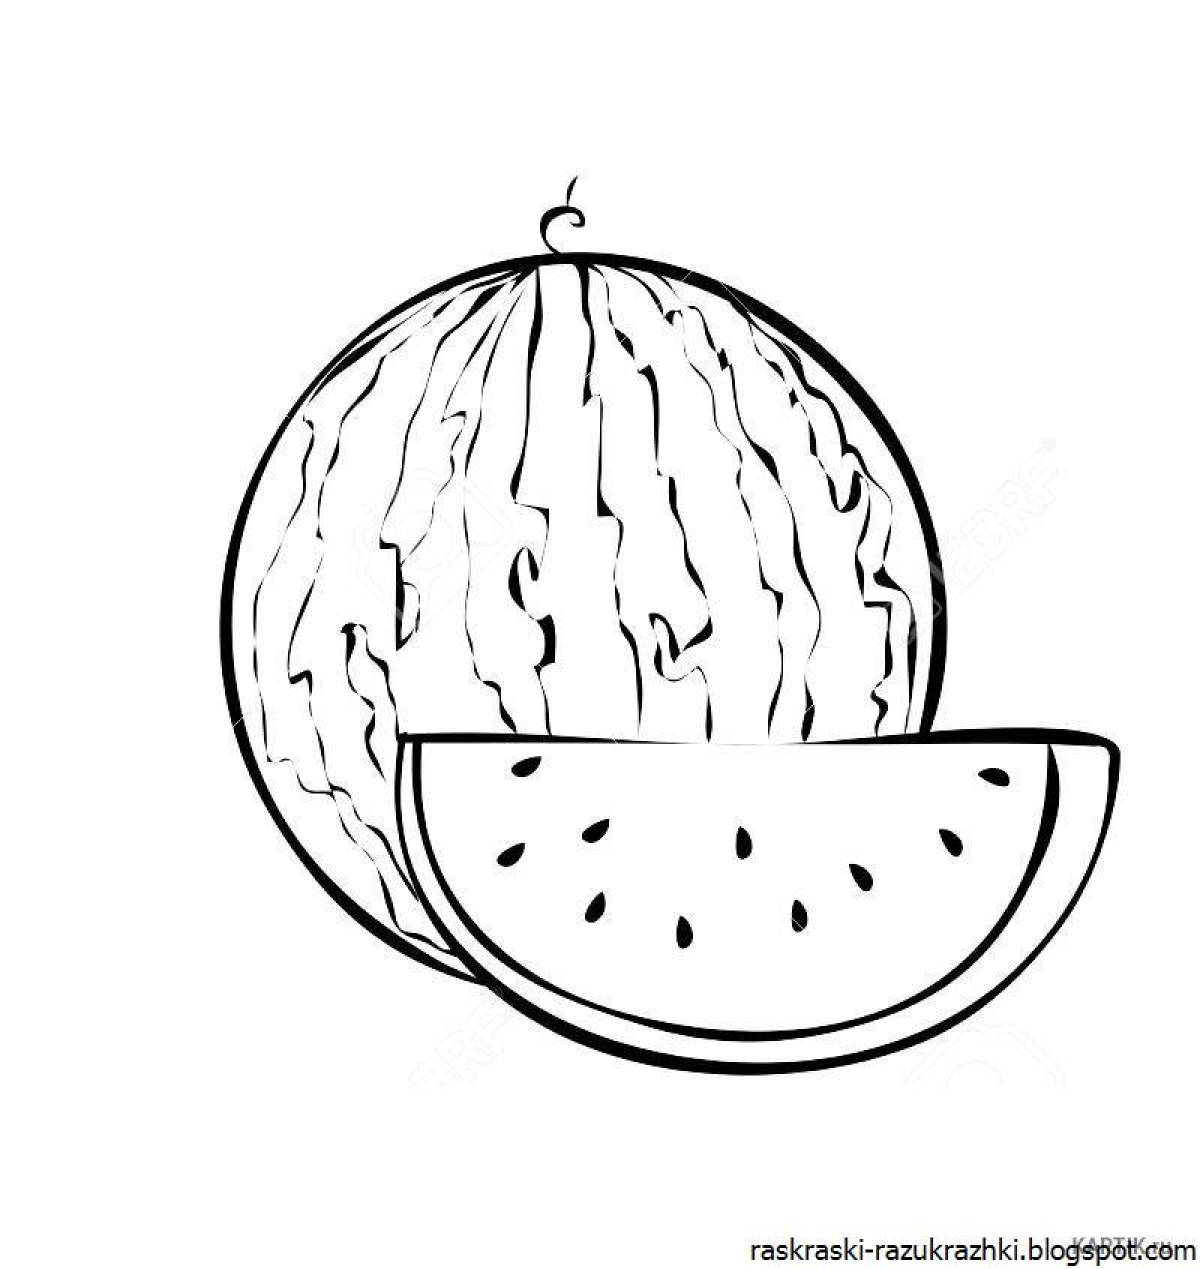 Wonderful watermelon coloring book for kids